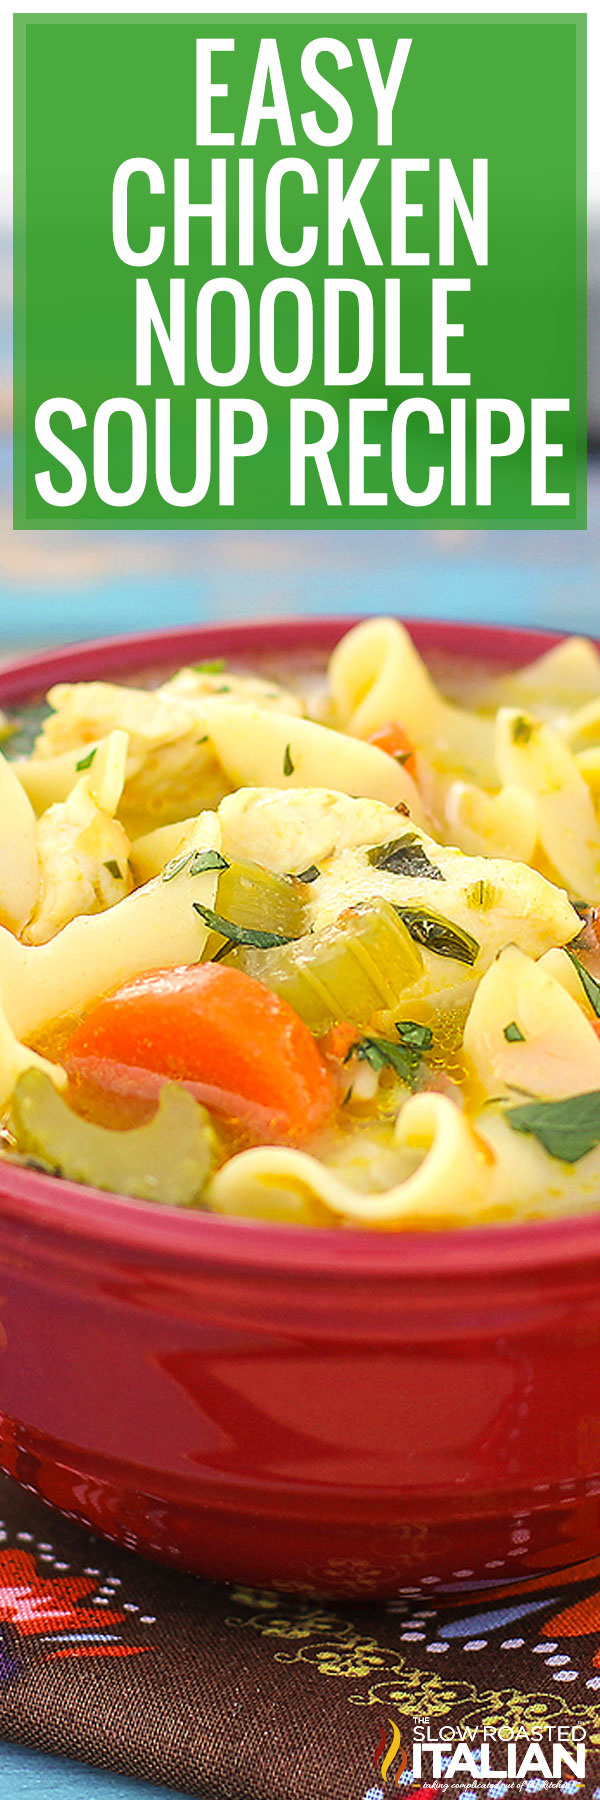 Easy Chicken Noodle Soup Recipe - PIN